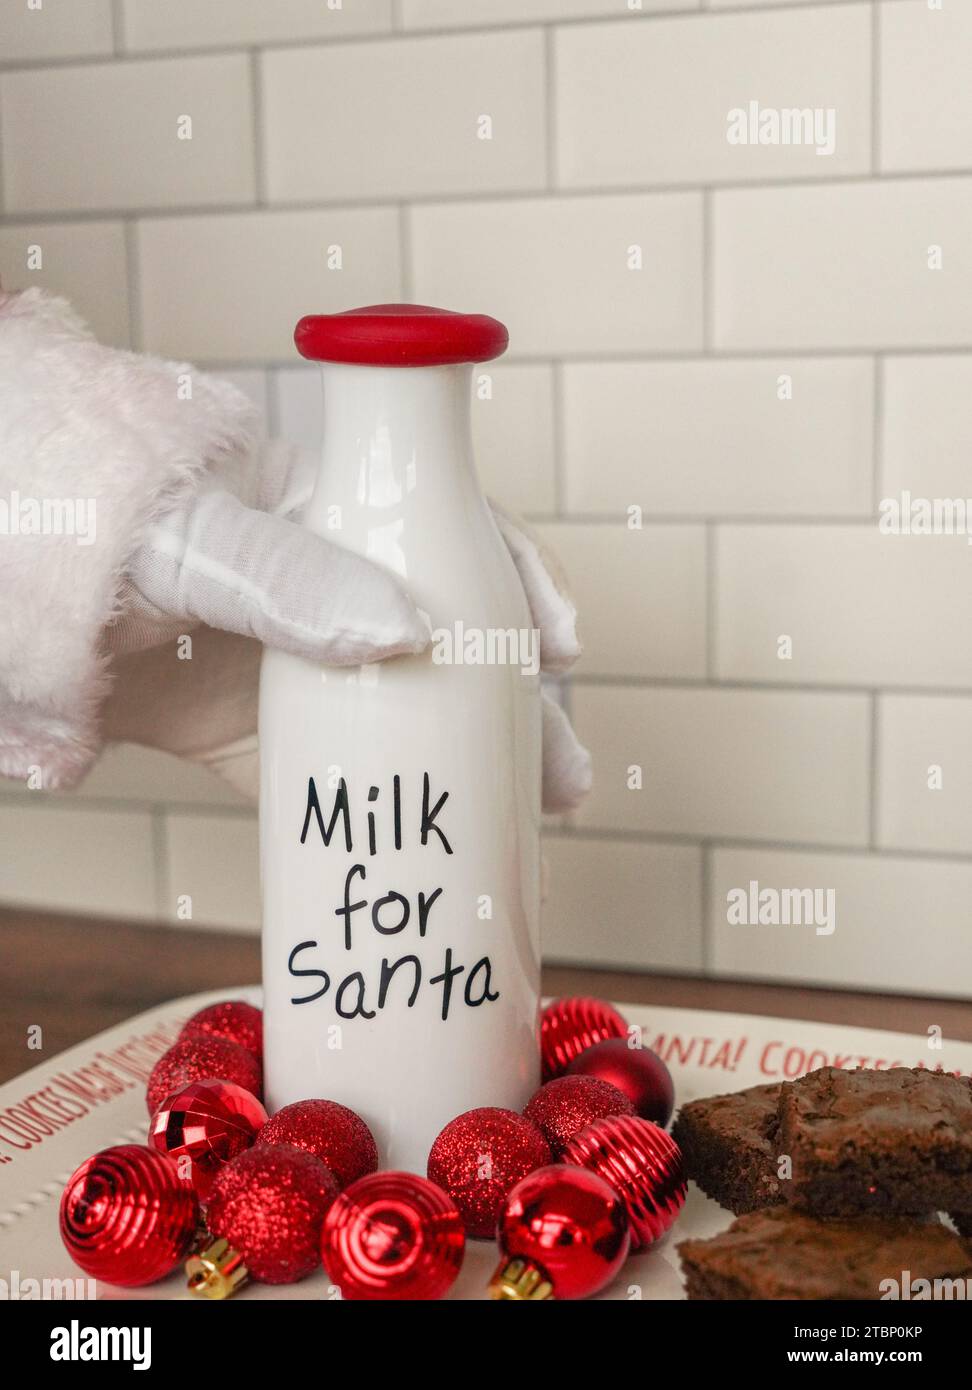 Santa reaching for a bottle of milk next to brownies Stock Photo